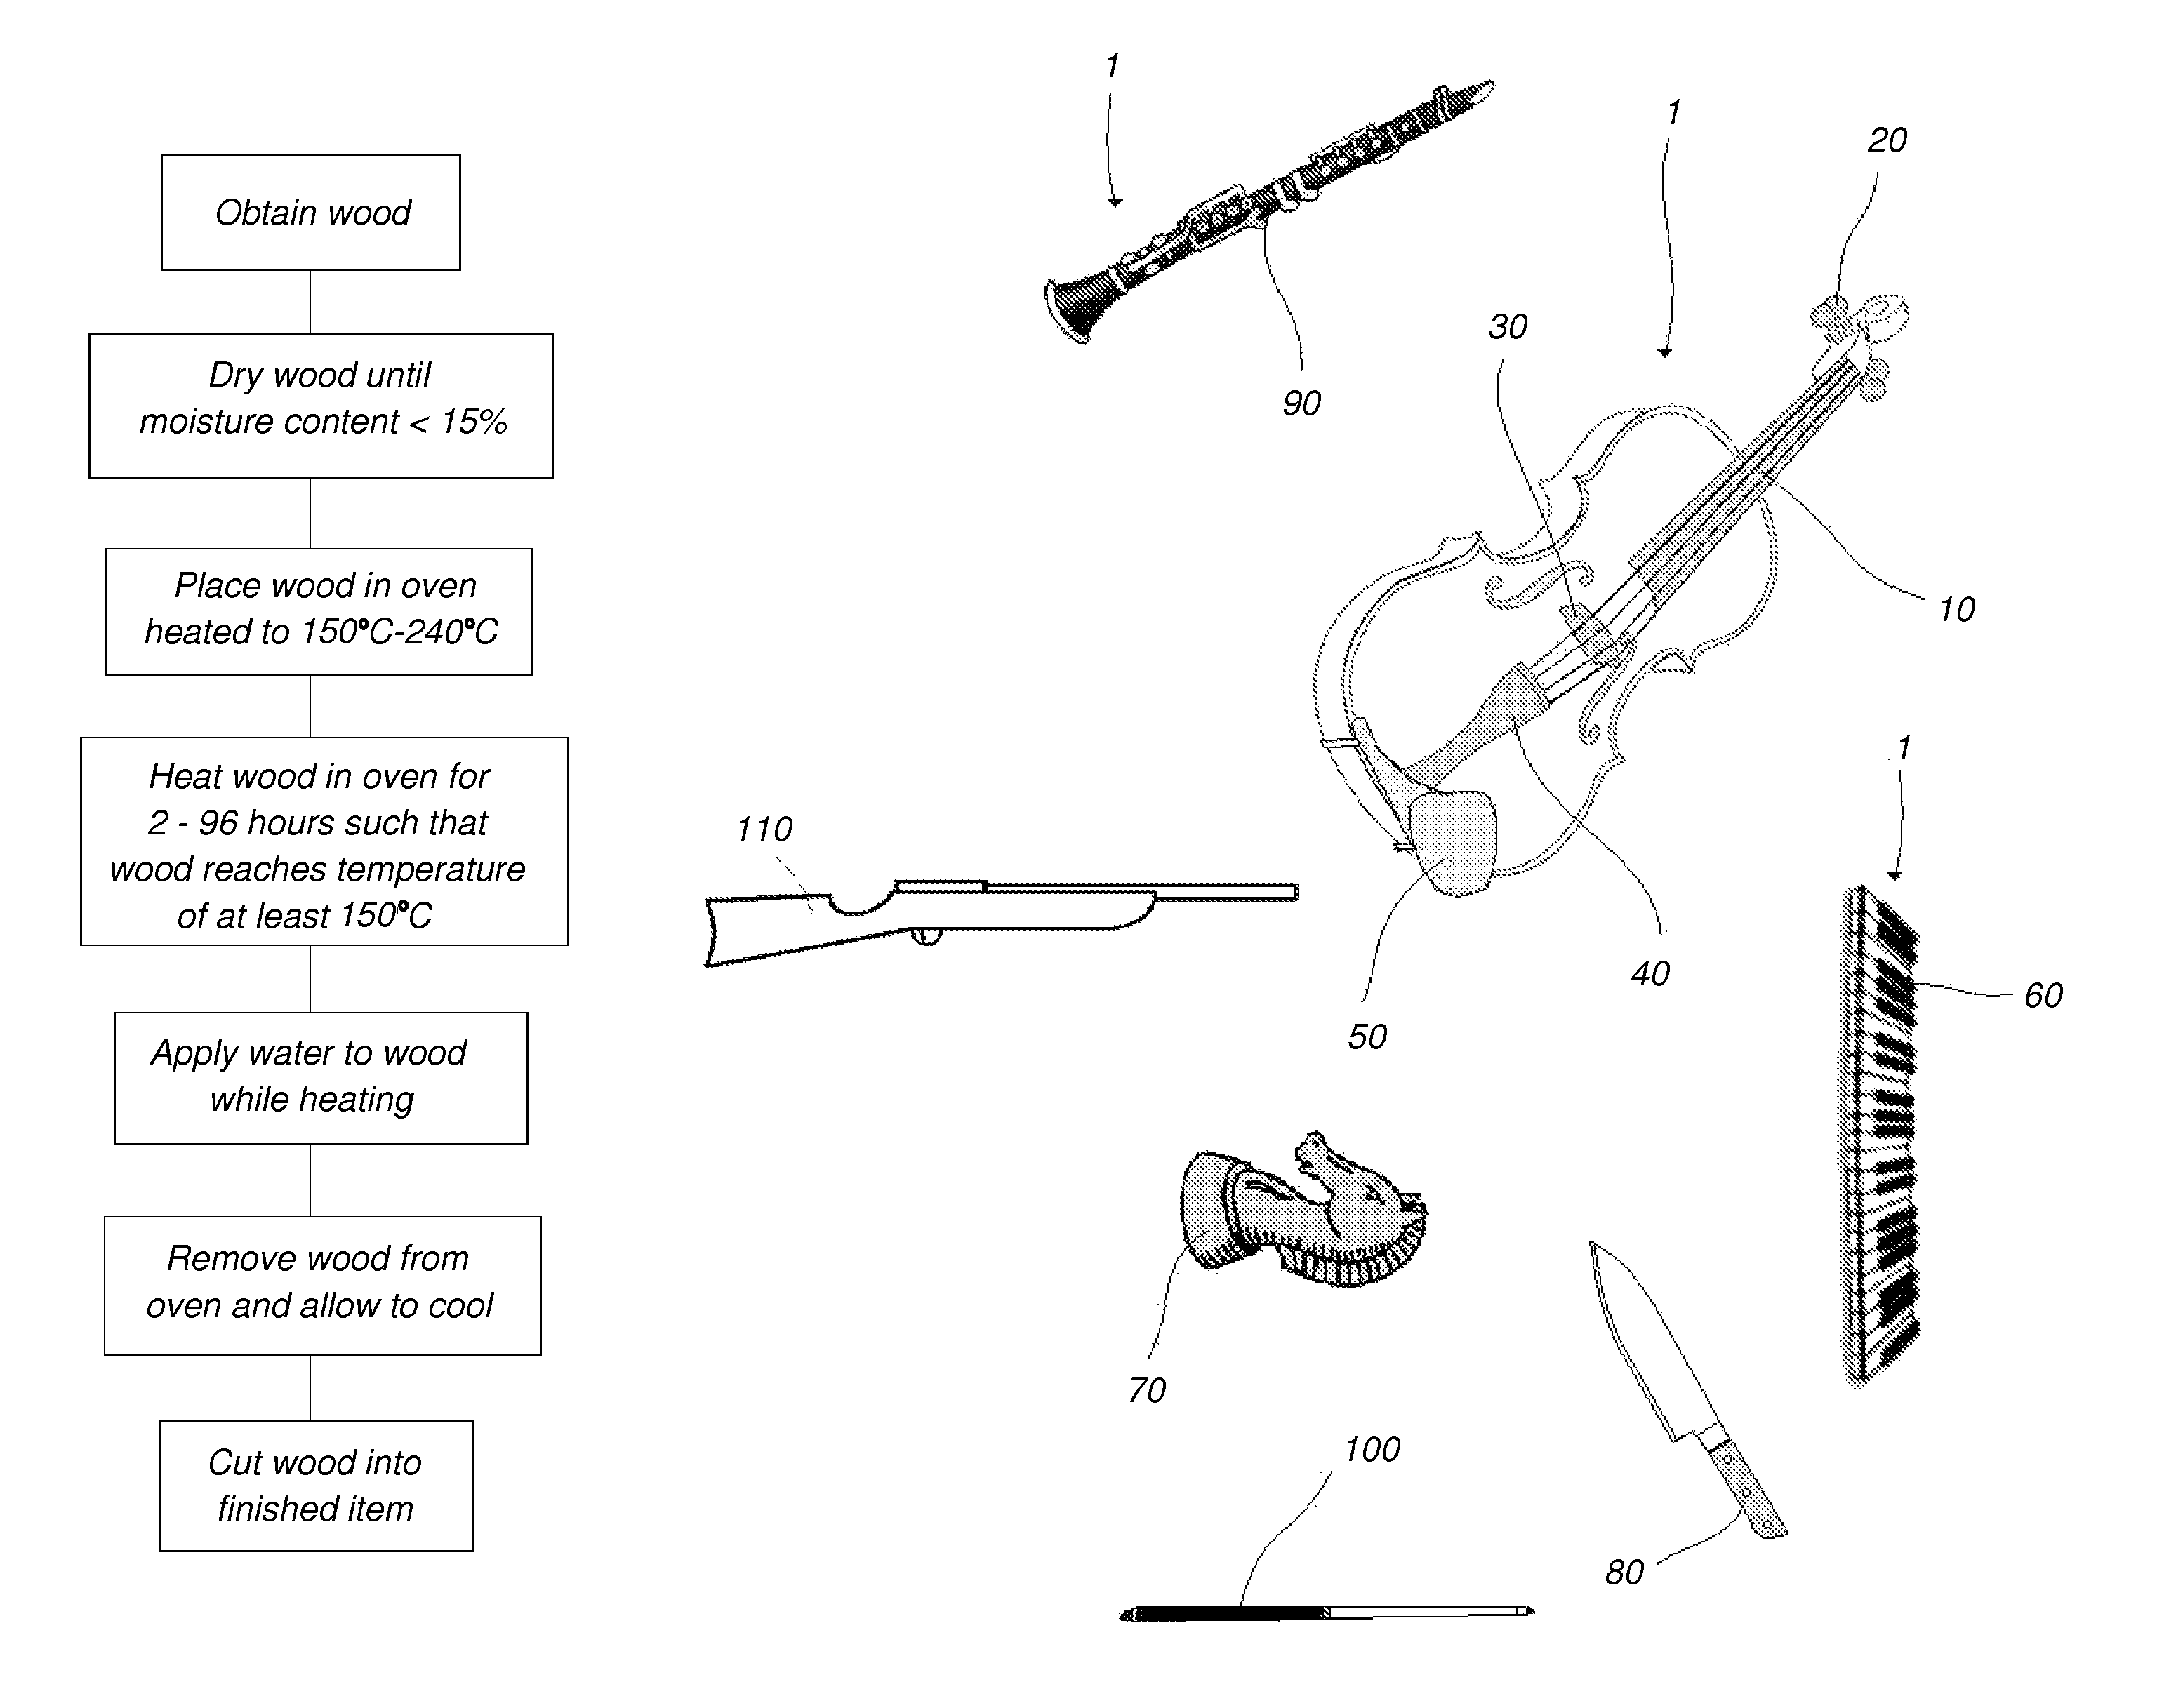 Method of treatment of wooden items